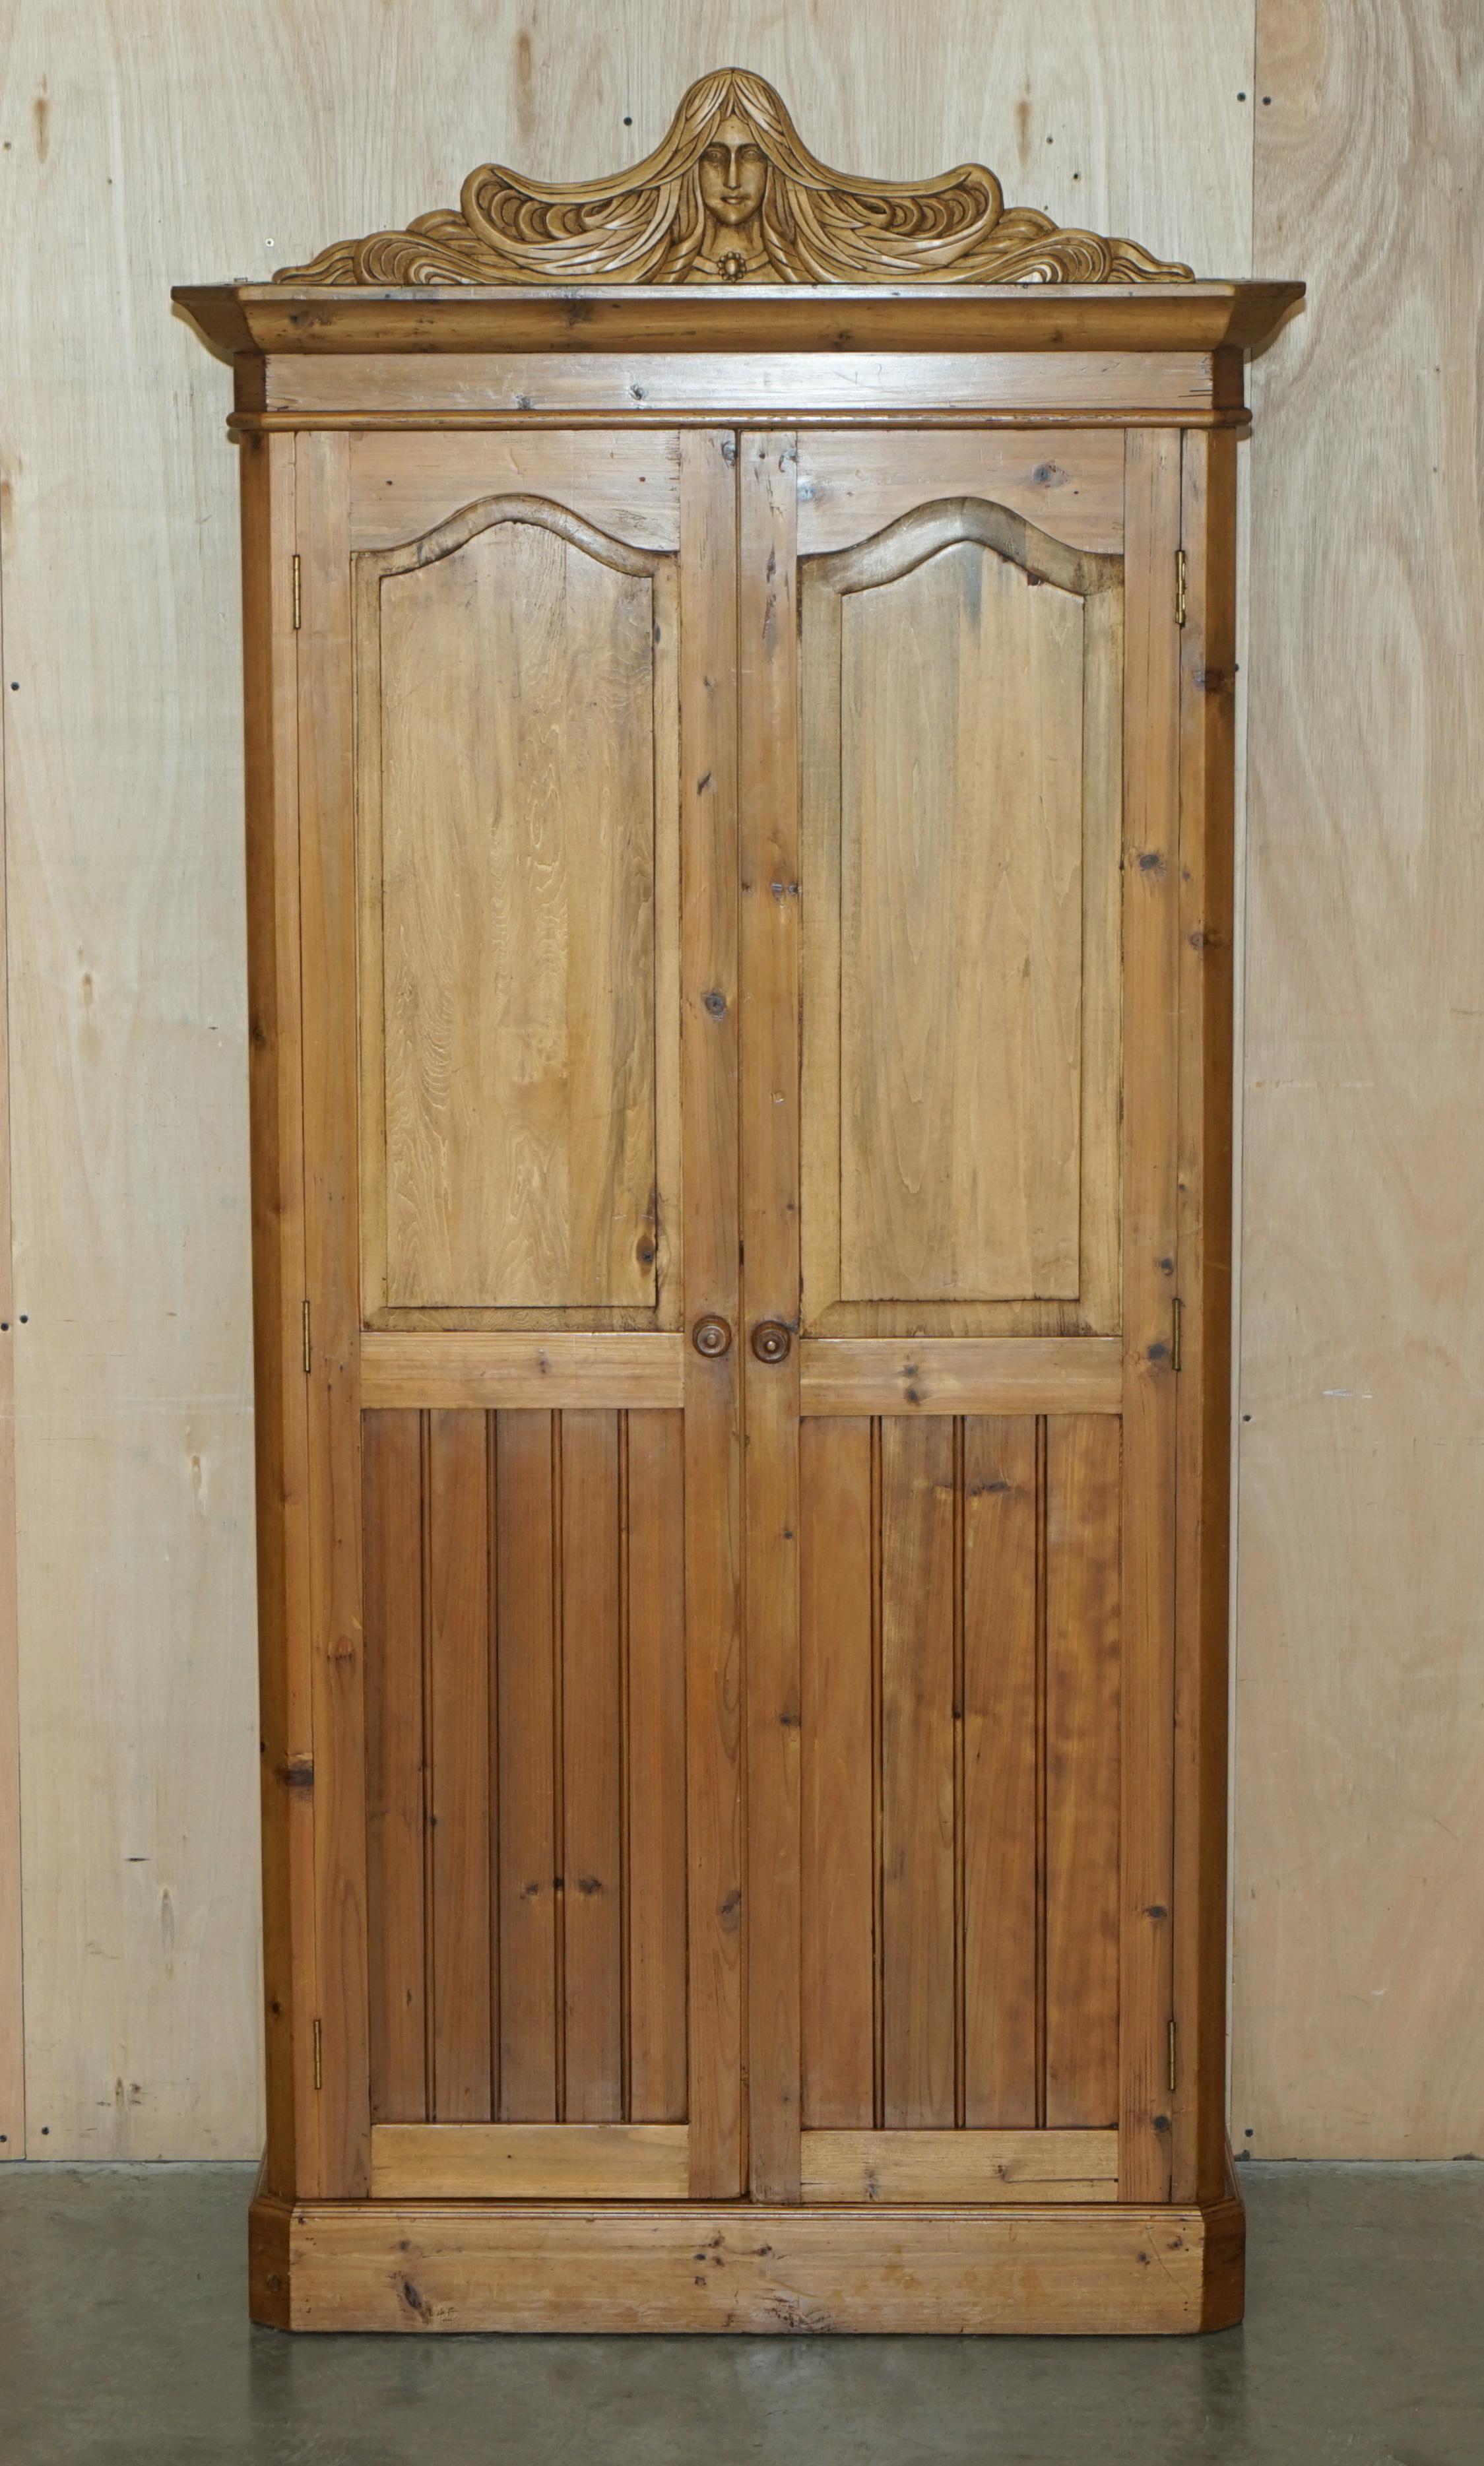 Royal House Antiques

Royal House Antiques is delighted to offer for sale this Exquisite Liberty's of London Art Nouveau style, hand carved Pine wardrobe depicting Nude Nymphs inside

Please note the delivery fee listed is just a guide, it covers